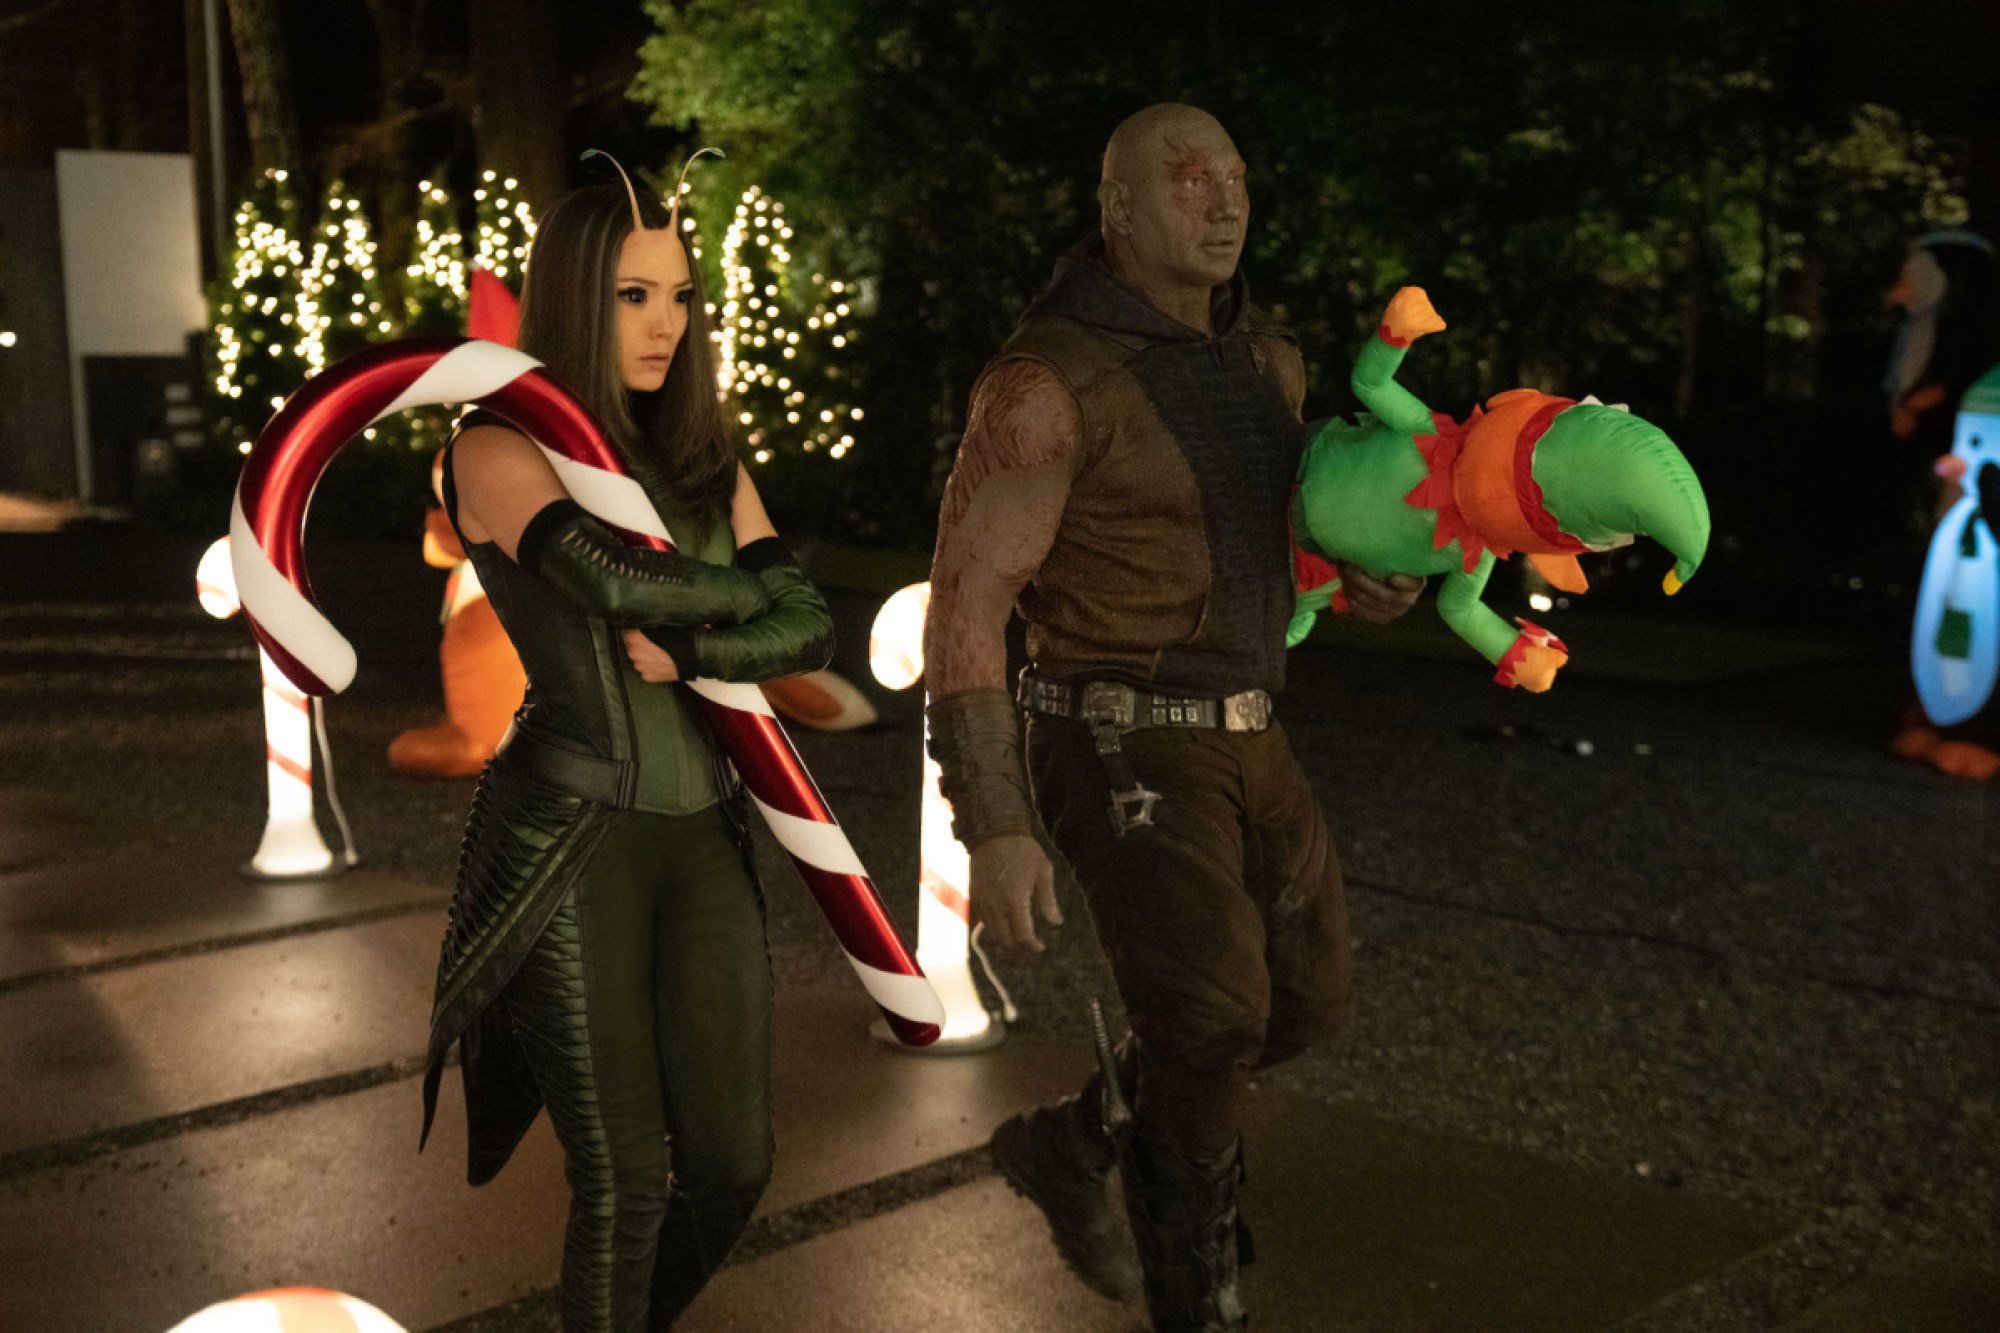 Streaming or Skipping: Disney+’s “Guardians of the Galaxy Holiday Special” is a Marvelous Christmas Present